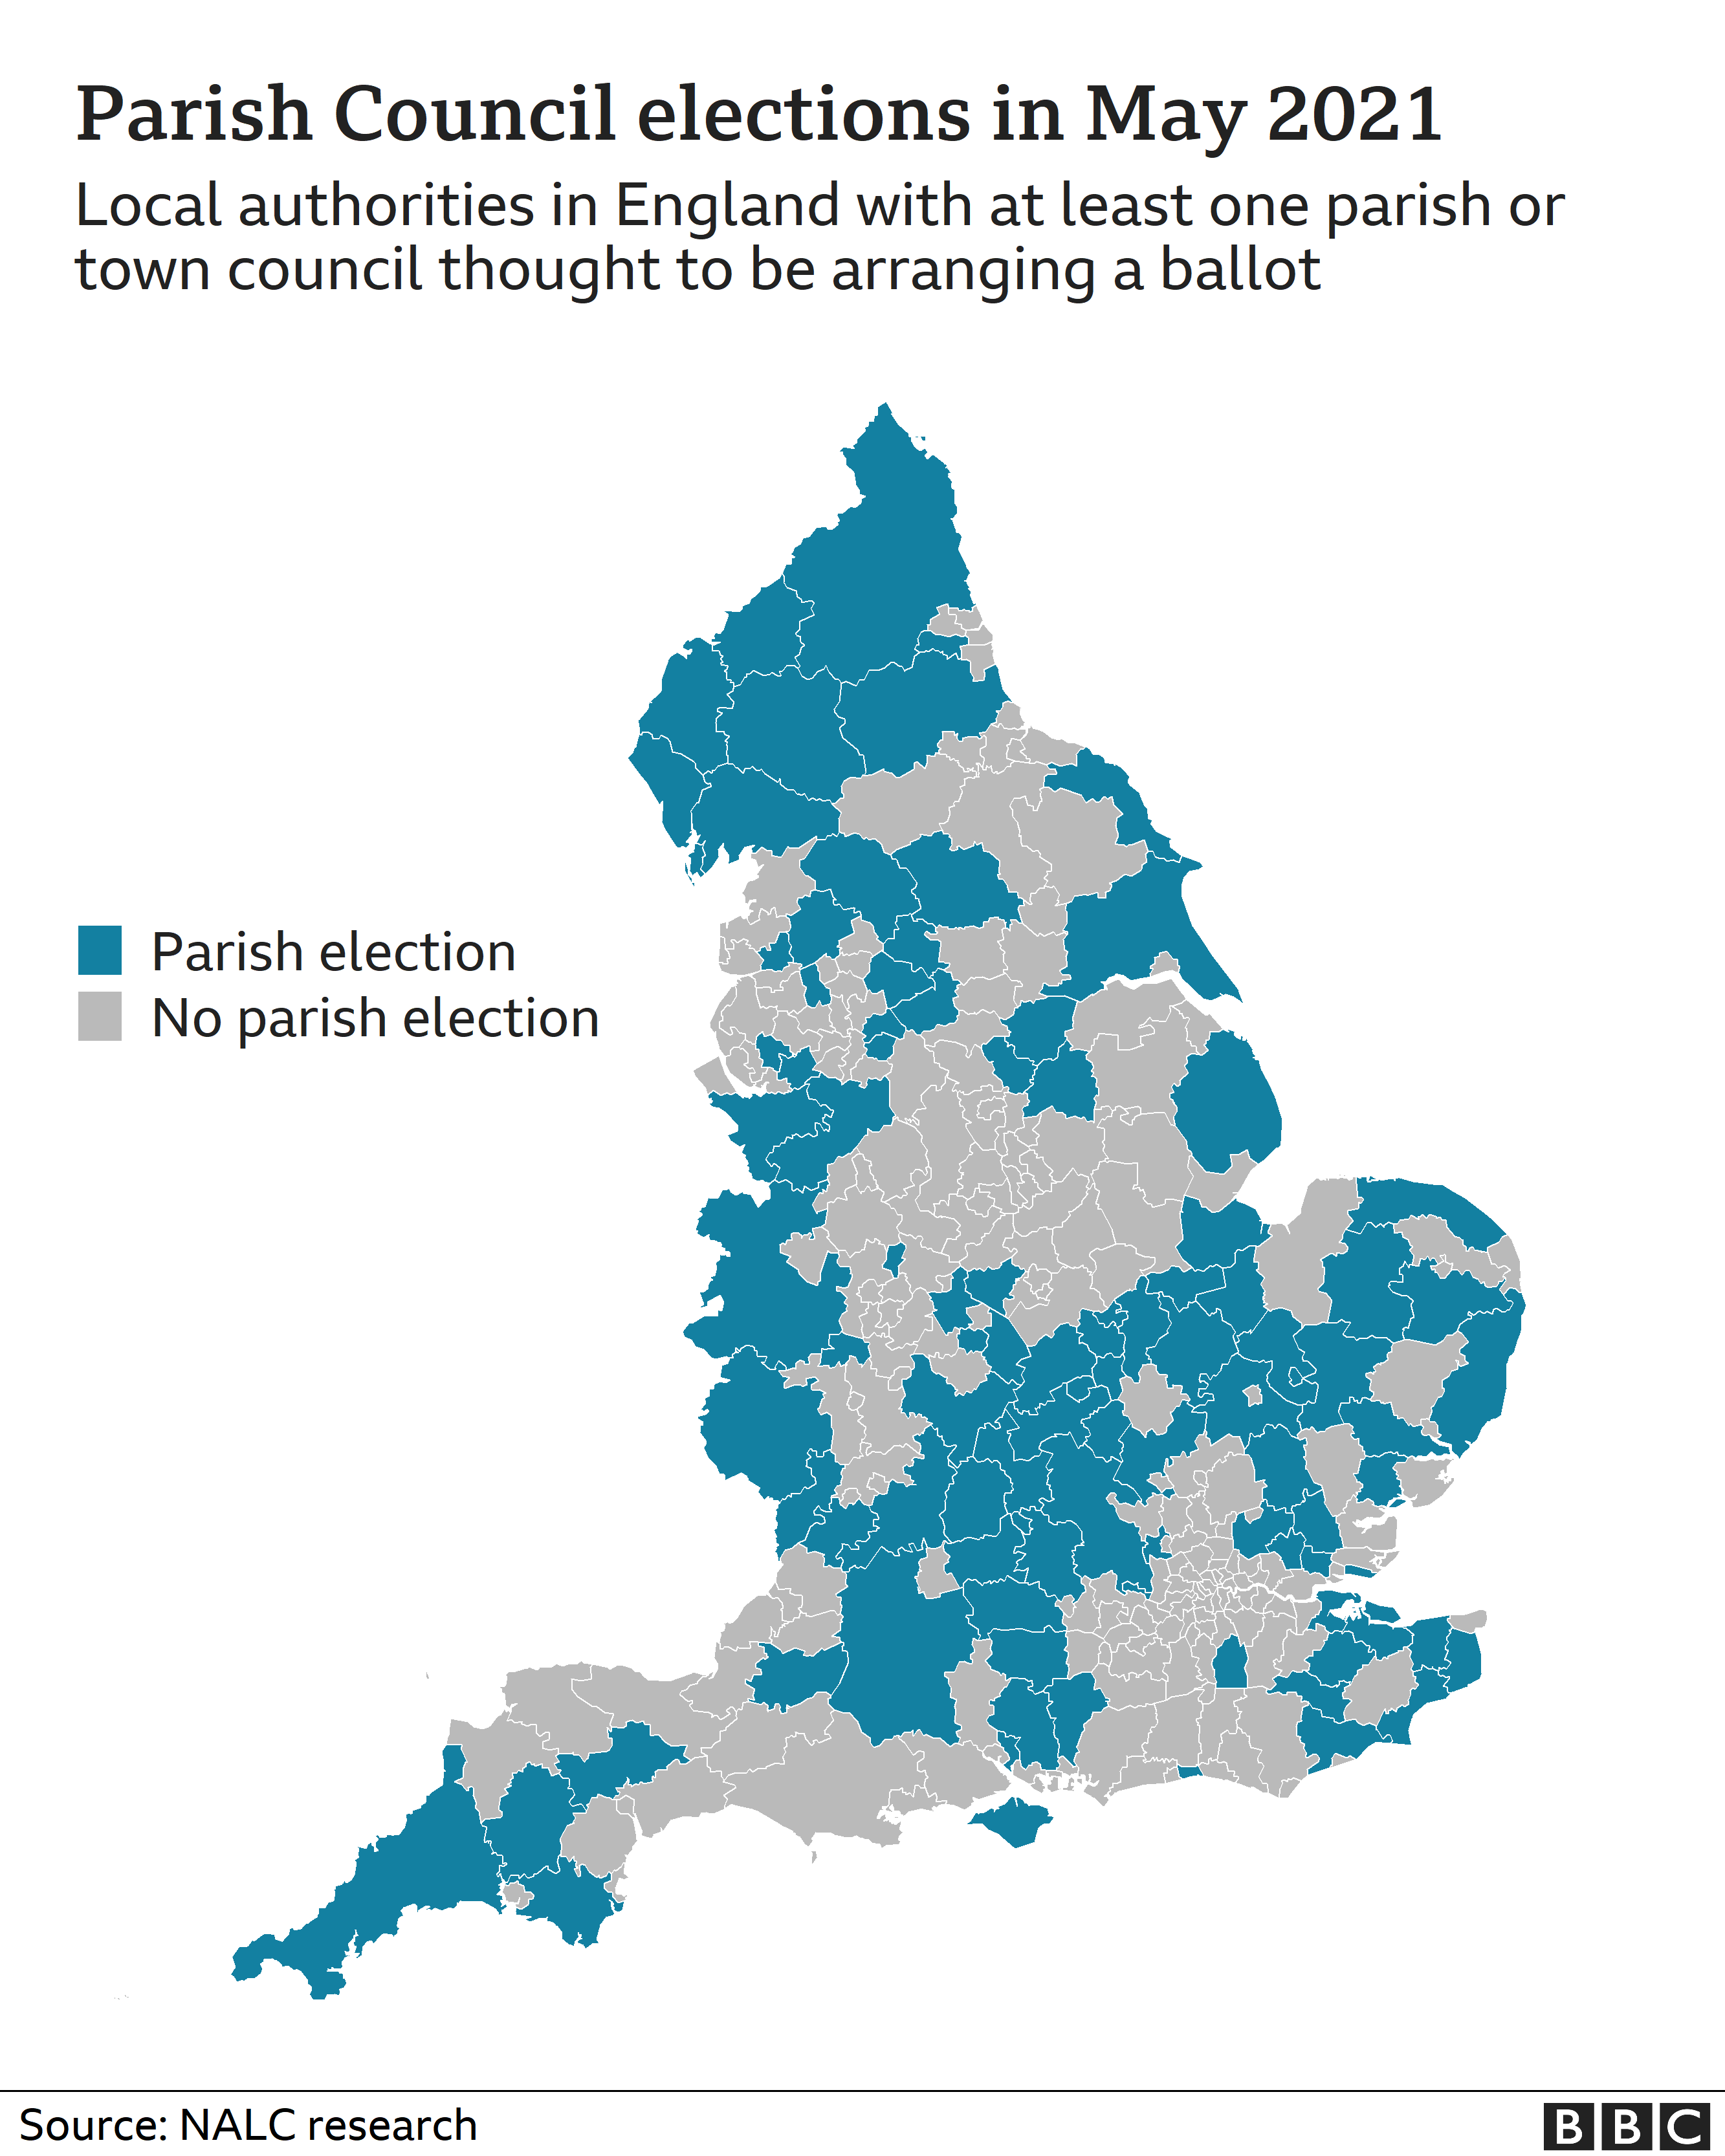 map showing the local authorities with at least one parish holding an election